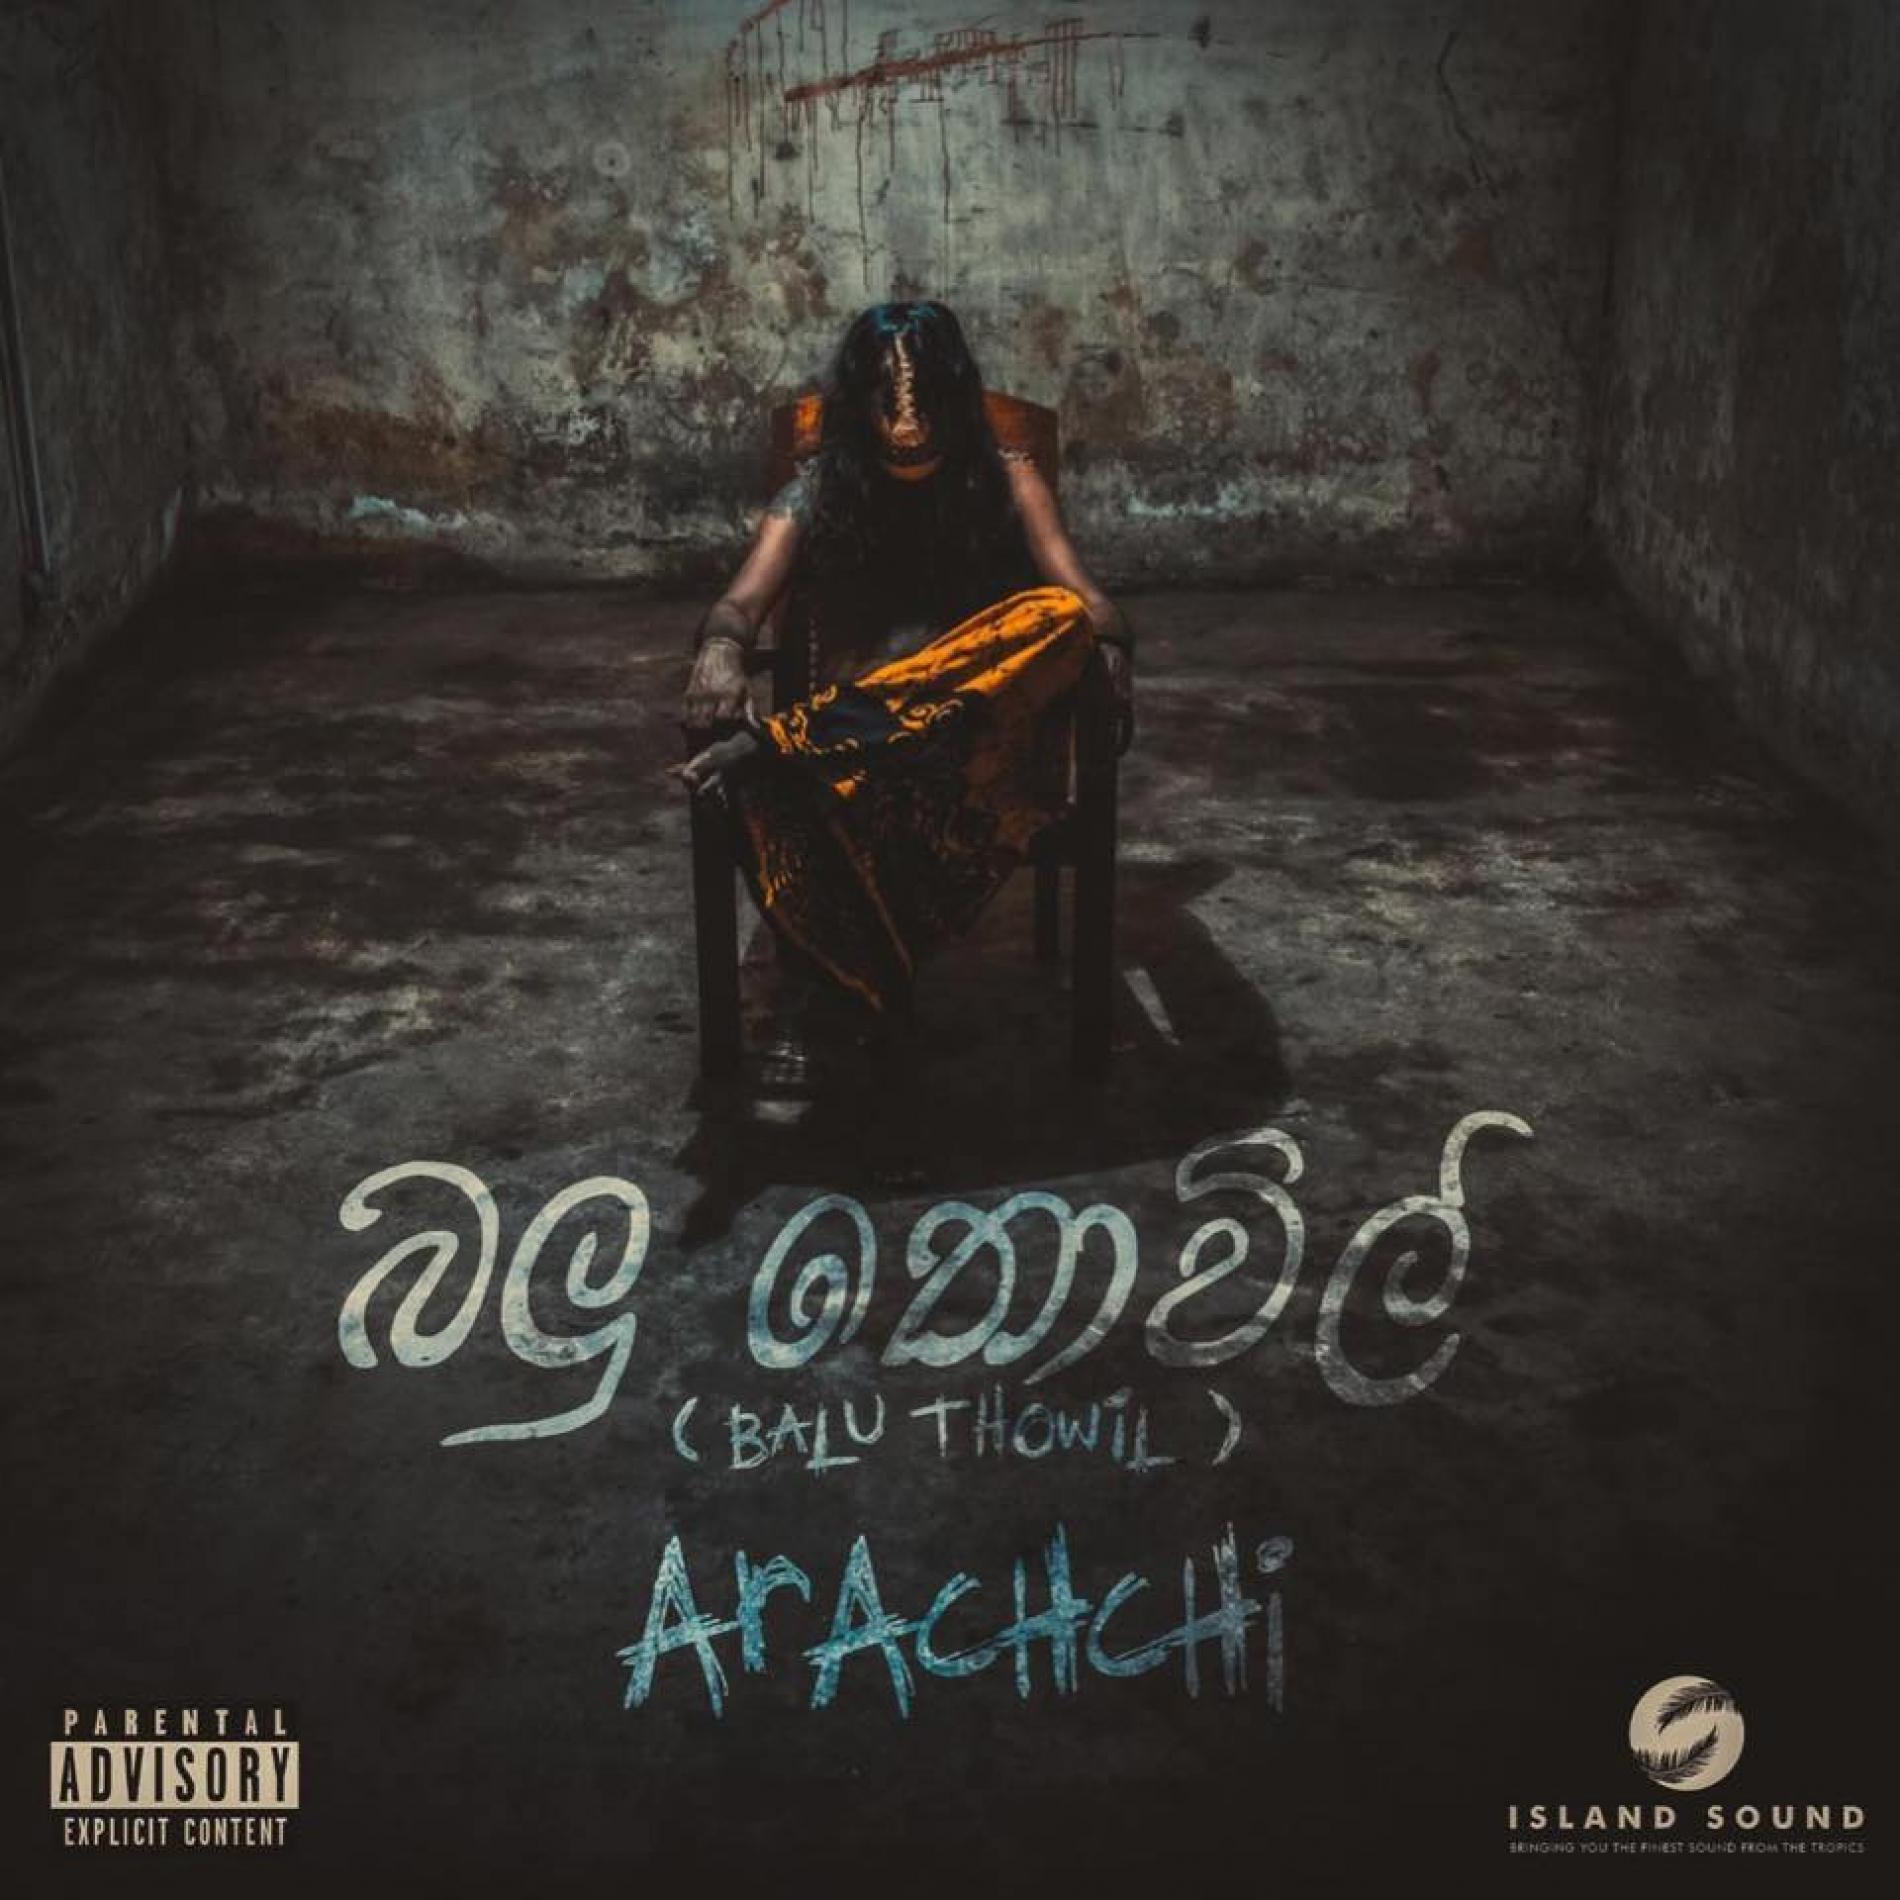 New Music : Arachchi – Balu Thowil (Prod By Soulker) [Official Music Video]